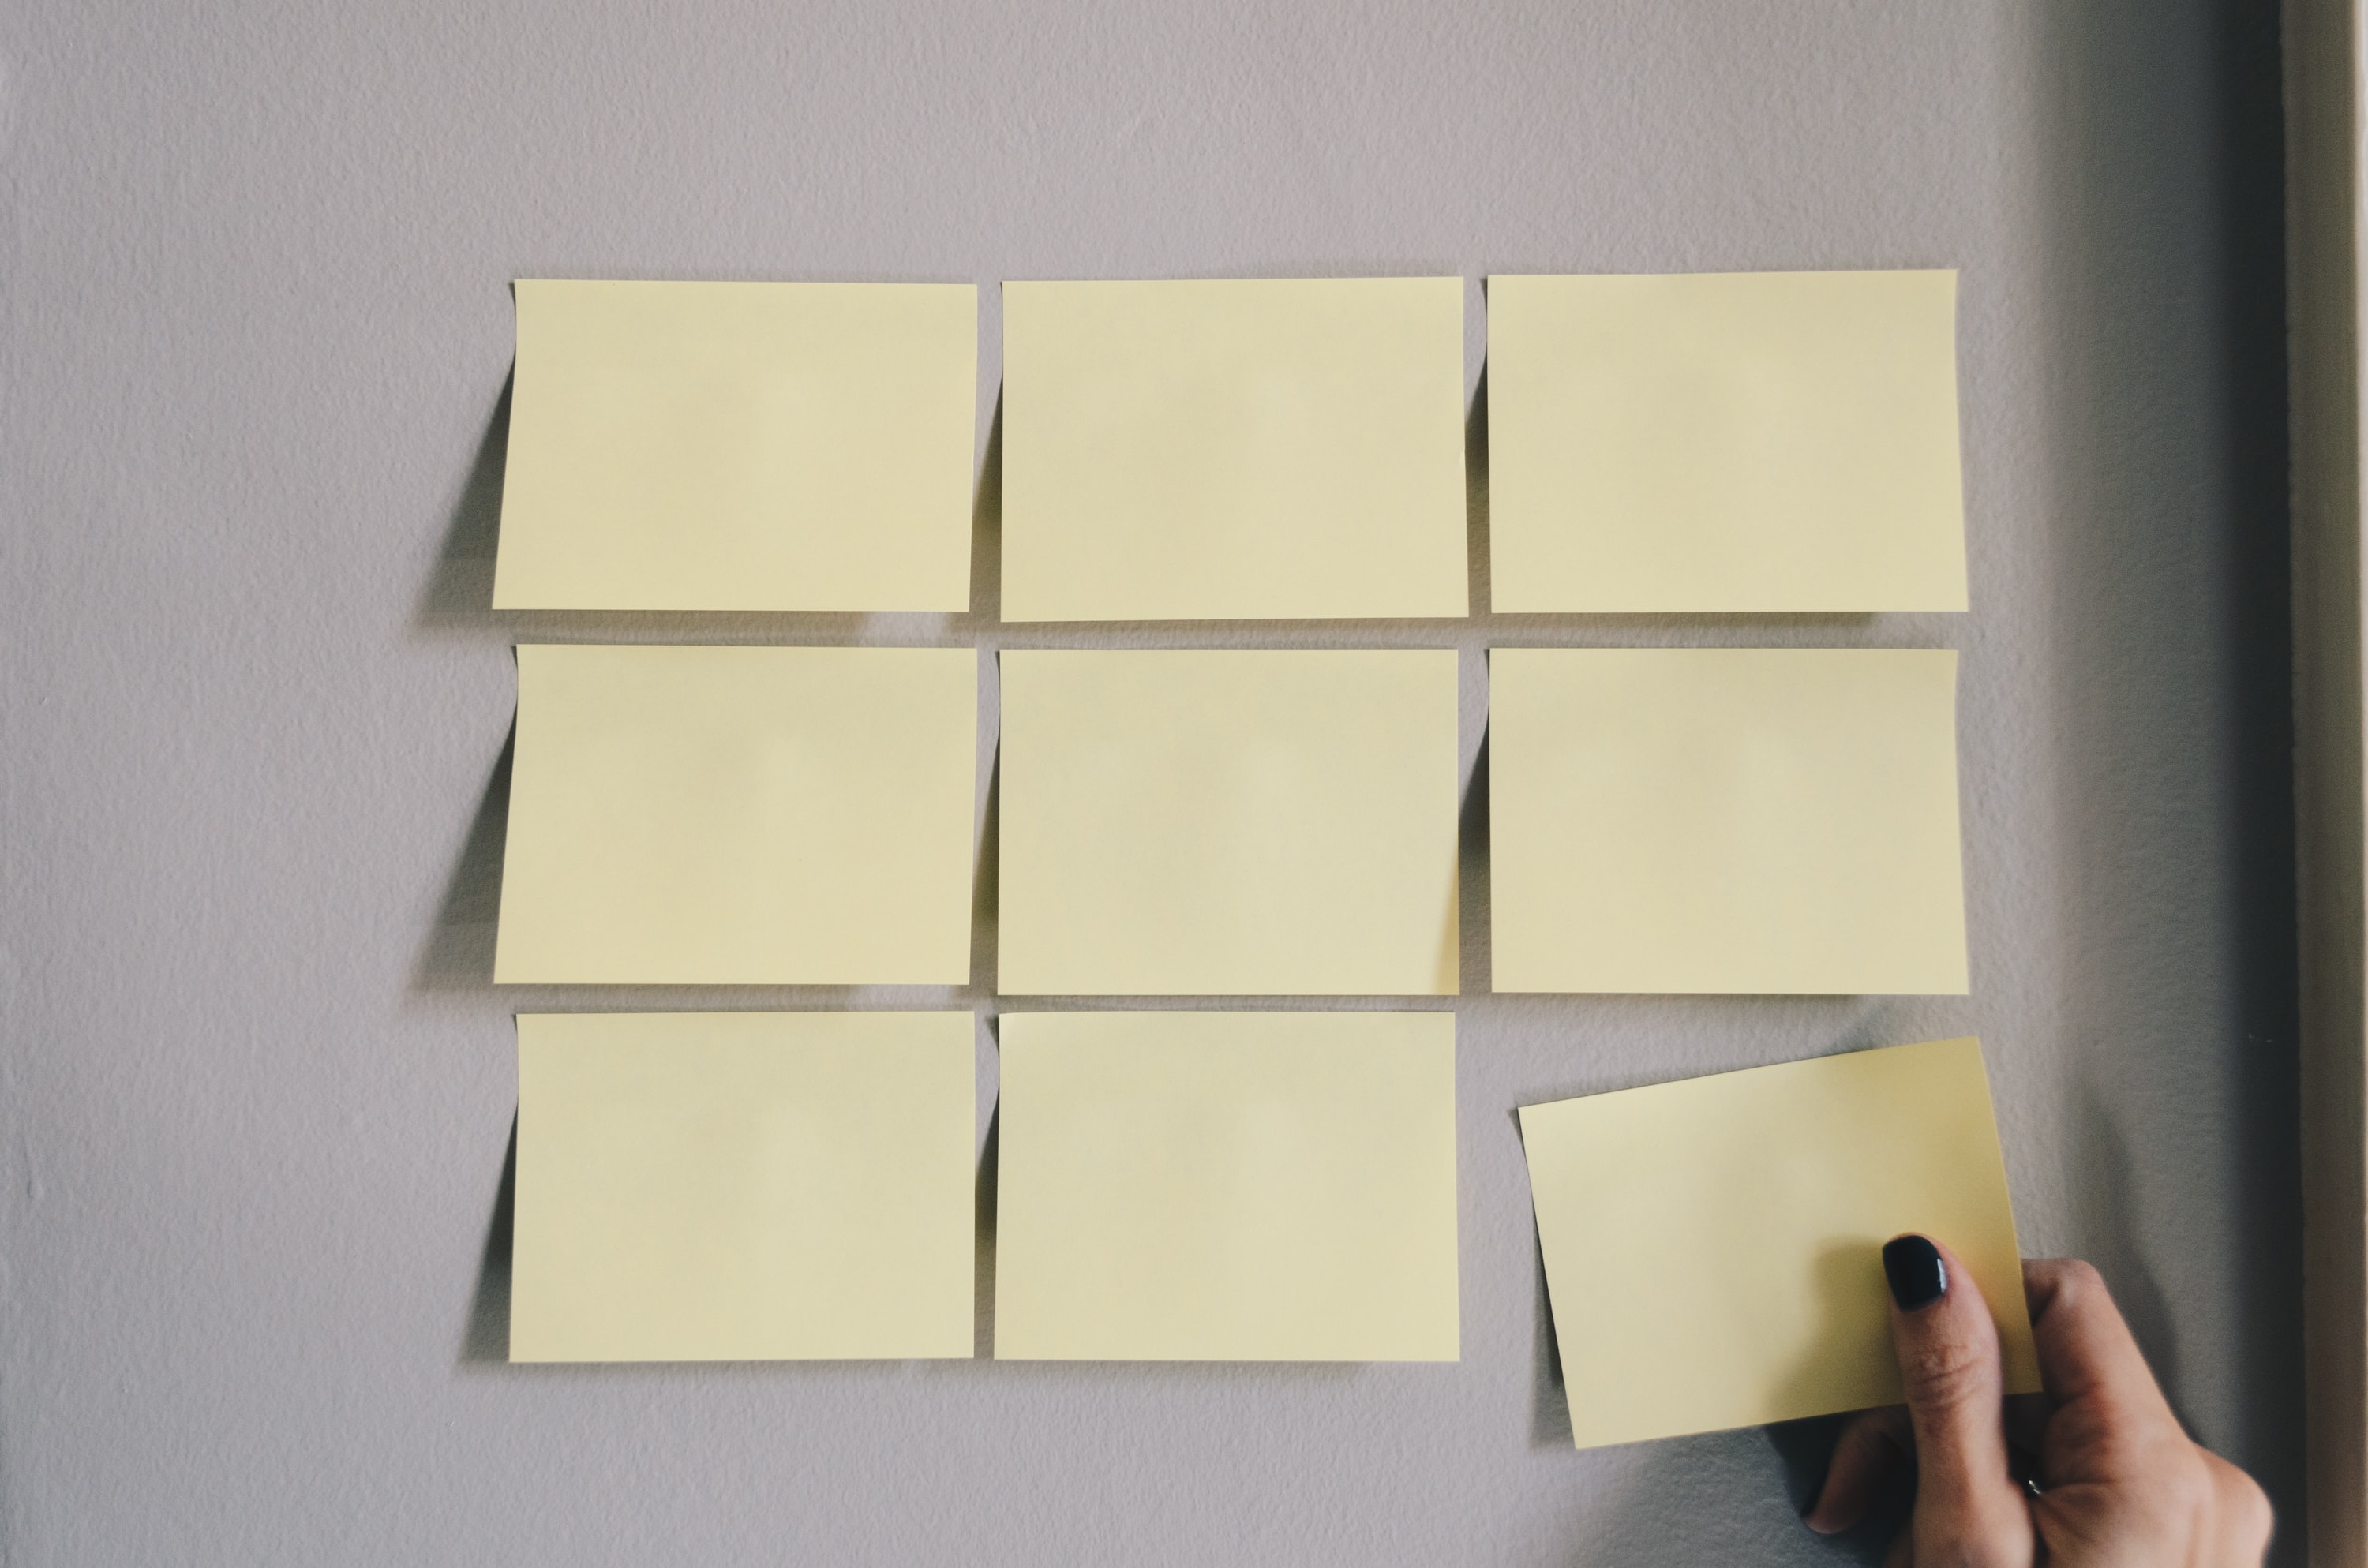 Nine yellow sticky notes on a wall